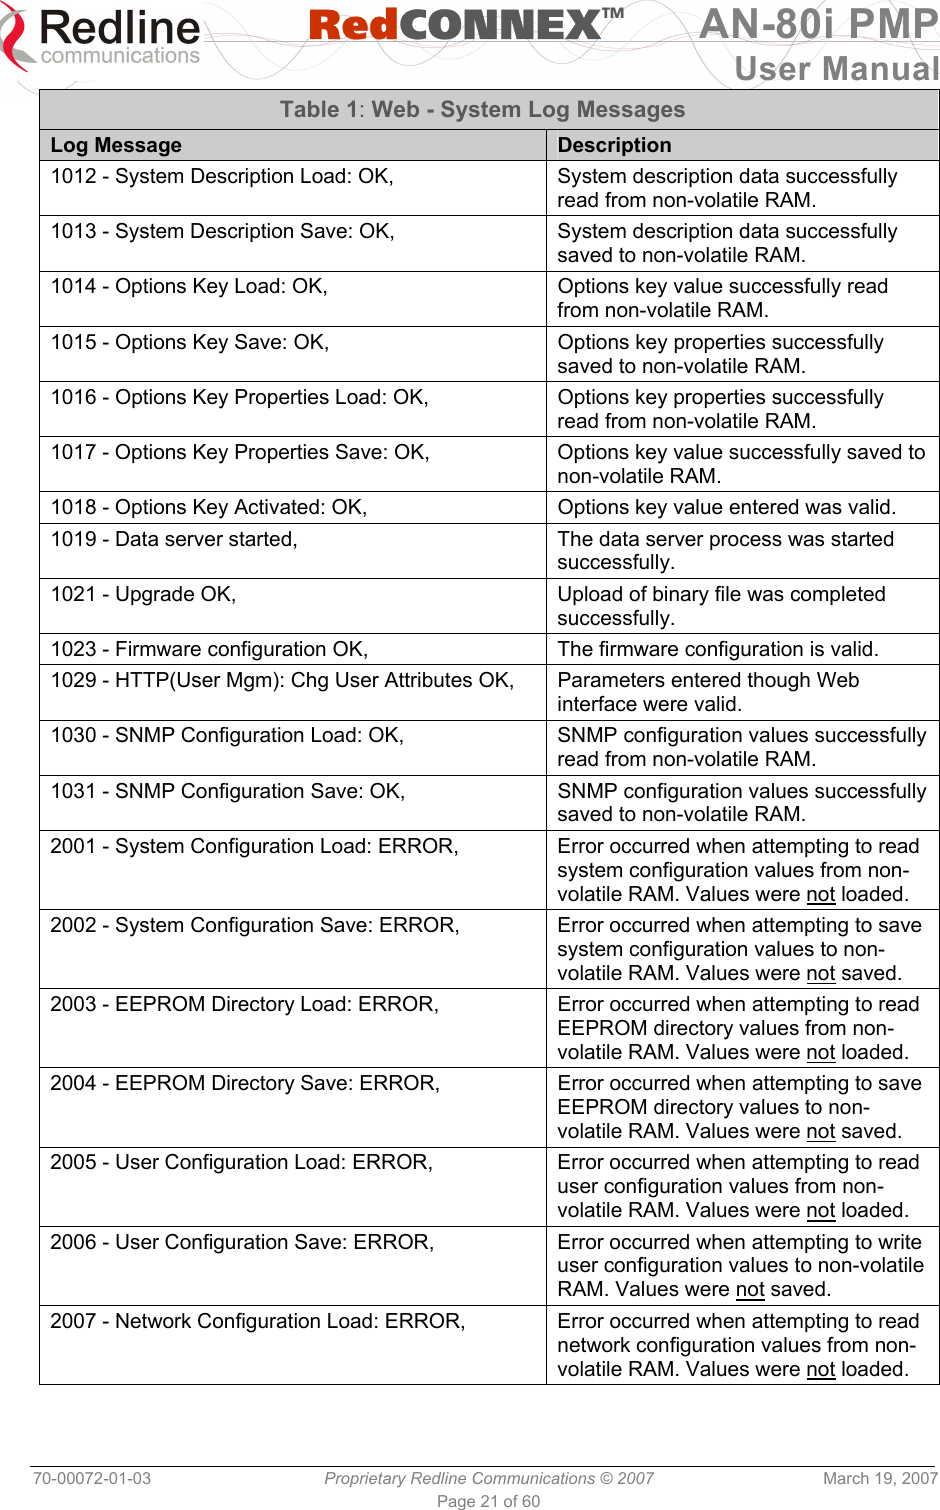   RedCONNEXTM AN-80i PMP User Manual 70-00072-01-03  Proprietary Redline Communications © 2007  March 19, 2007 Page 21 of 60 Table 1: Web - System Log Messages Log Message  Description 1012 - System Description Load: OK,  System description data successfully read from non-volatile RAM. 1013 - System Description Save: OK,  System description data successfully saved to non-volatile RAM. 1014 - Options Key Load: OK,  Options key value successfully read from non-volatile RAM. 1015 - Options Key Save: OK,  Options key properties successfully saved to non-volatile RAM. 1016 - Options Key Properties Load: OK,  Options key properties successfully read from non-volatile RAM. 1017 - Options Key Properties Save: OK,  Options key value successfully saved to non-volatile RAM. 1018 - Options Key Activated: OK,  Options key value entered was valid. 1019 - Data server started,  The data server process was started successfully. 1021 - Upgrade OK,  Upload of binary file was completed successfully. 1023 - Firmware configuration OK,  The firmware configuration is valid. 1029 - HTTP(User Mgm): Chg User Attributes OK,  Parameters entered though Web interface were valid. 1030 - SNMP Configuration Load: OK,  SNMP configuration values successfully read from non-volatile RAM. 1031 - SNMP Configuration Save: OK,  SNMP configuration values successfully saved to non-volatile RAM. 2001 - System Configuration Load: ERROR,  Error occurred when attempting to read system configuration values from non-volatile RAM. Values were not loaded. 2002 - System Configuration Save: ERROR,  Error occurred when attempting to save system configuration values to non-volatile RAM. Values were not saved. 2003 - EEPROM Directory Load: ERROR,  Error occurred when attempting to read EEPROM directory values from non-volatile RAM. Values were not loaded. 2004 - EEPROM Directory Save: ERROR,  Error occurred when attempting to save EEPROM directory values to non-volatile RAM. Values were not saved. 2005 - User Configuration Load: ERROR,  Error occurred when attempting to read user configuration values from non-volatile RAM. Values were not loaded. 2006 - User Configuration Save: ERROR,  Error occurred when attempting to write user configuration values to non-volatile RAM. Values were not saved. 2007 - Network Configuration Load: ERROR,  Error occurred when attempting to read network configuration values from non-volatile RAM. Values were not loaded. 